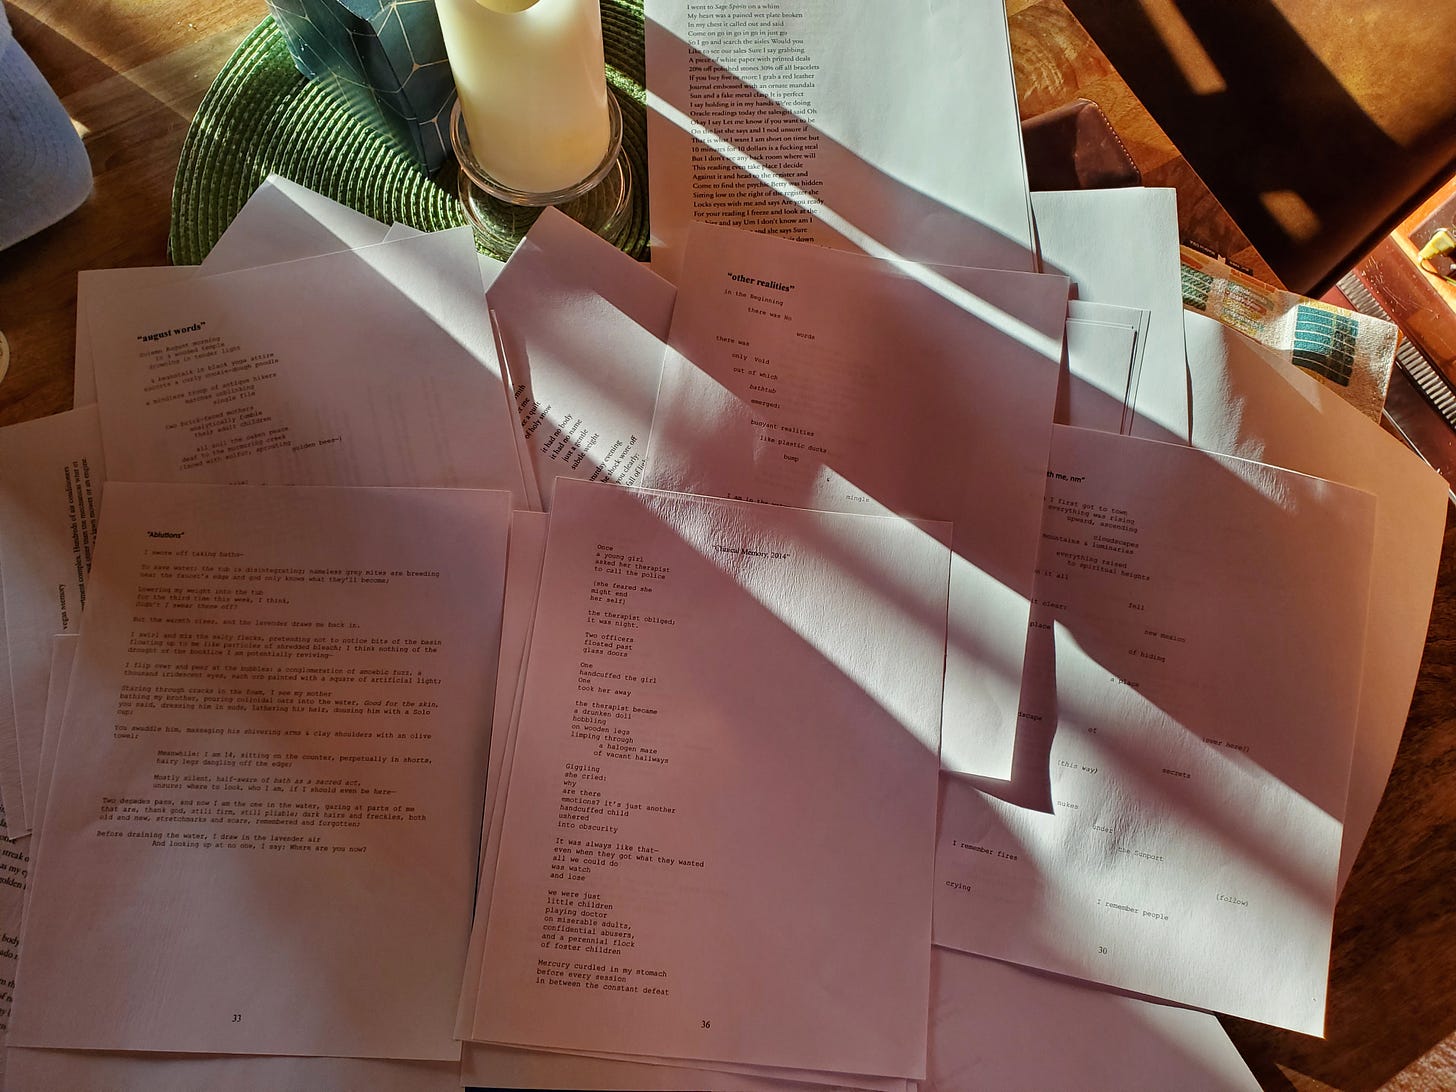 A pile of printed pages covered in poetic text lays on a kitchen table. Shafts of sunlight and shadow run across the surface. The poems themselves are illegible from this distance.